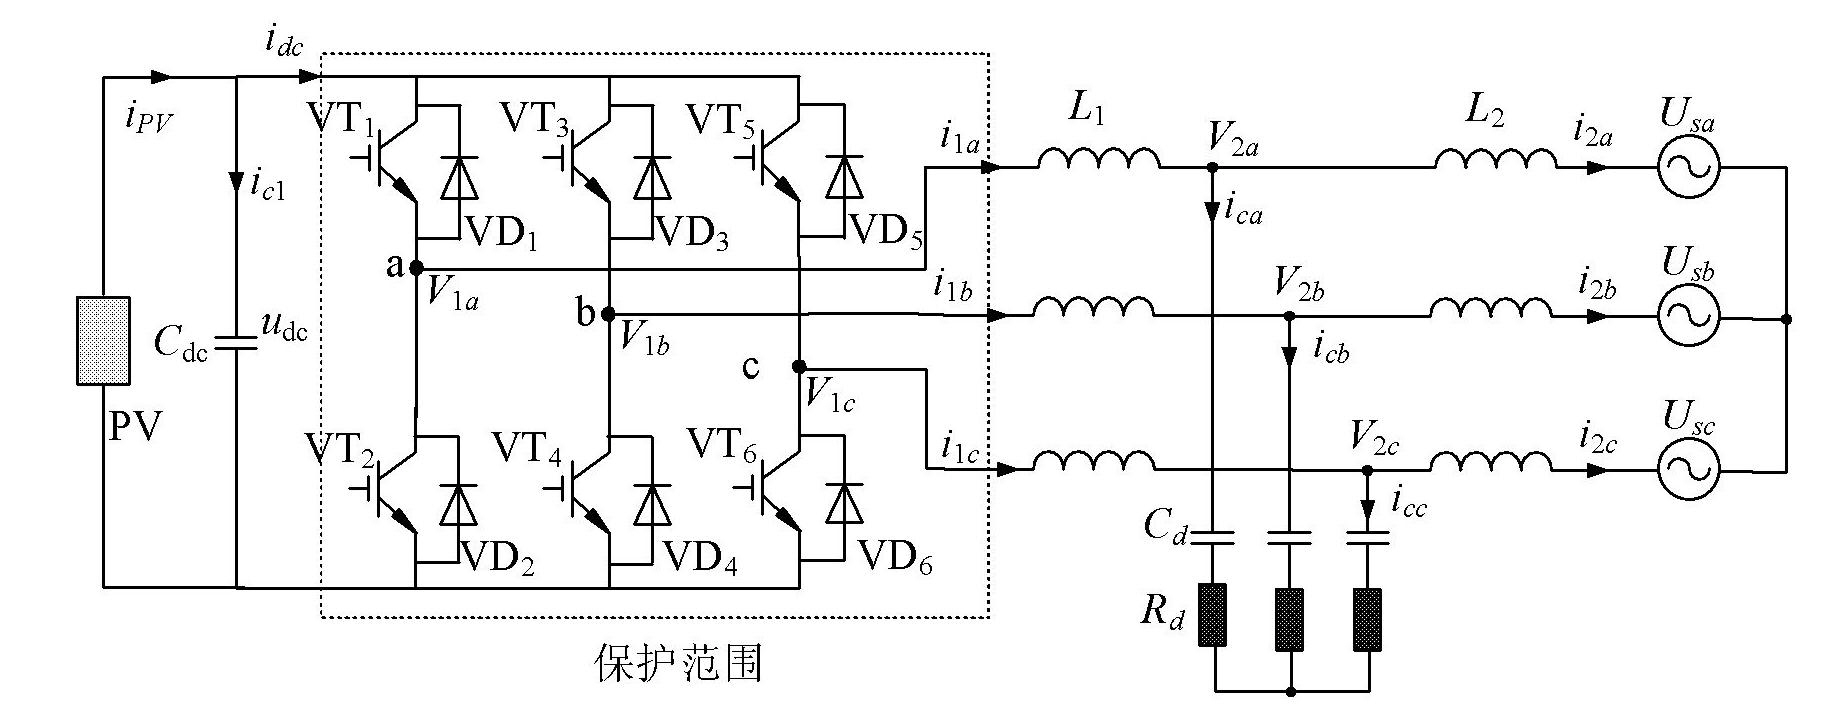 Method for protecting inverter in distributed generating system